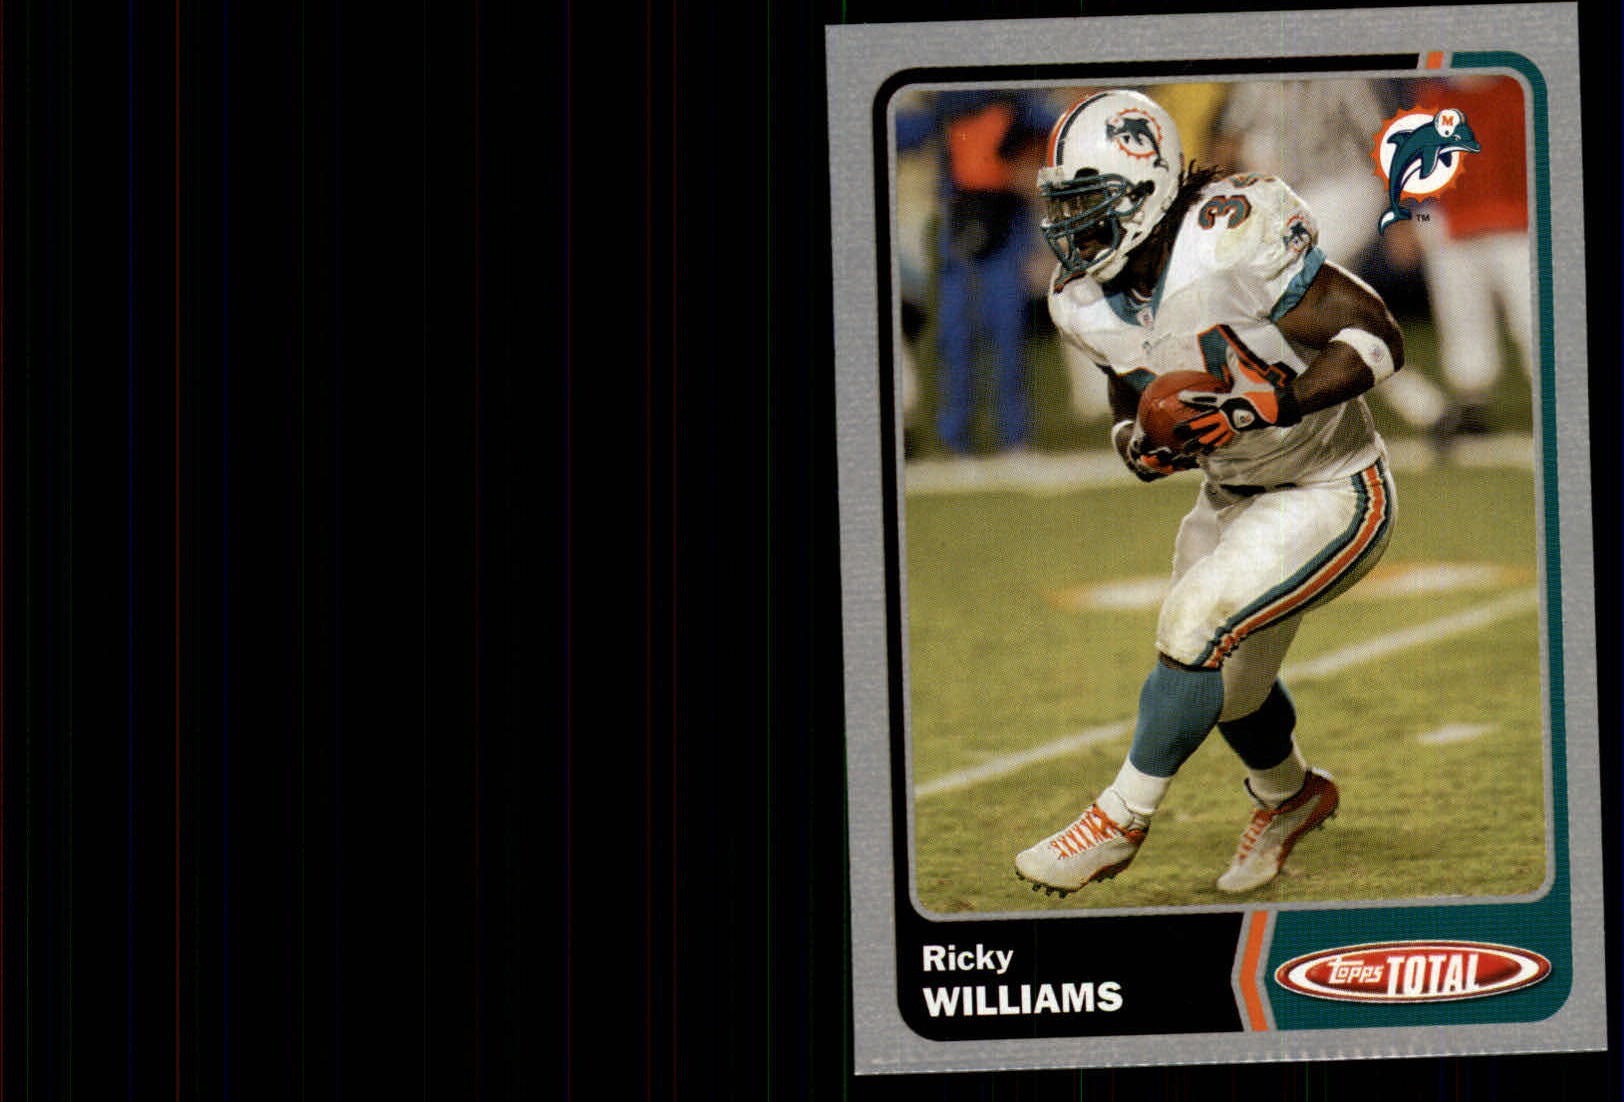 2003 Topps Total Silver #50 Ricky Williams